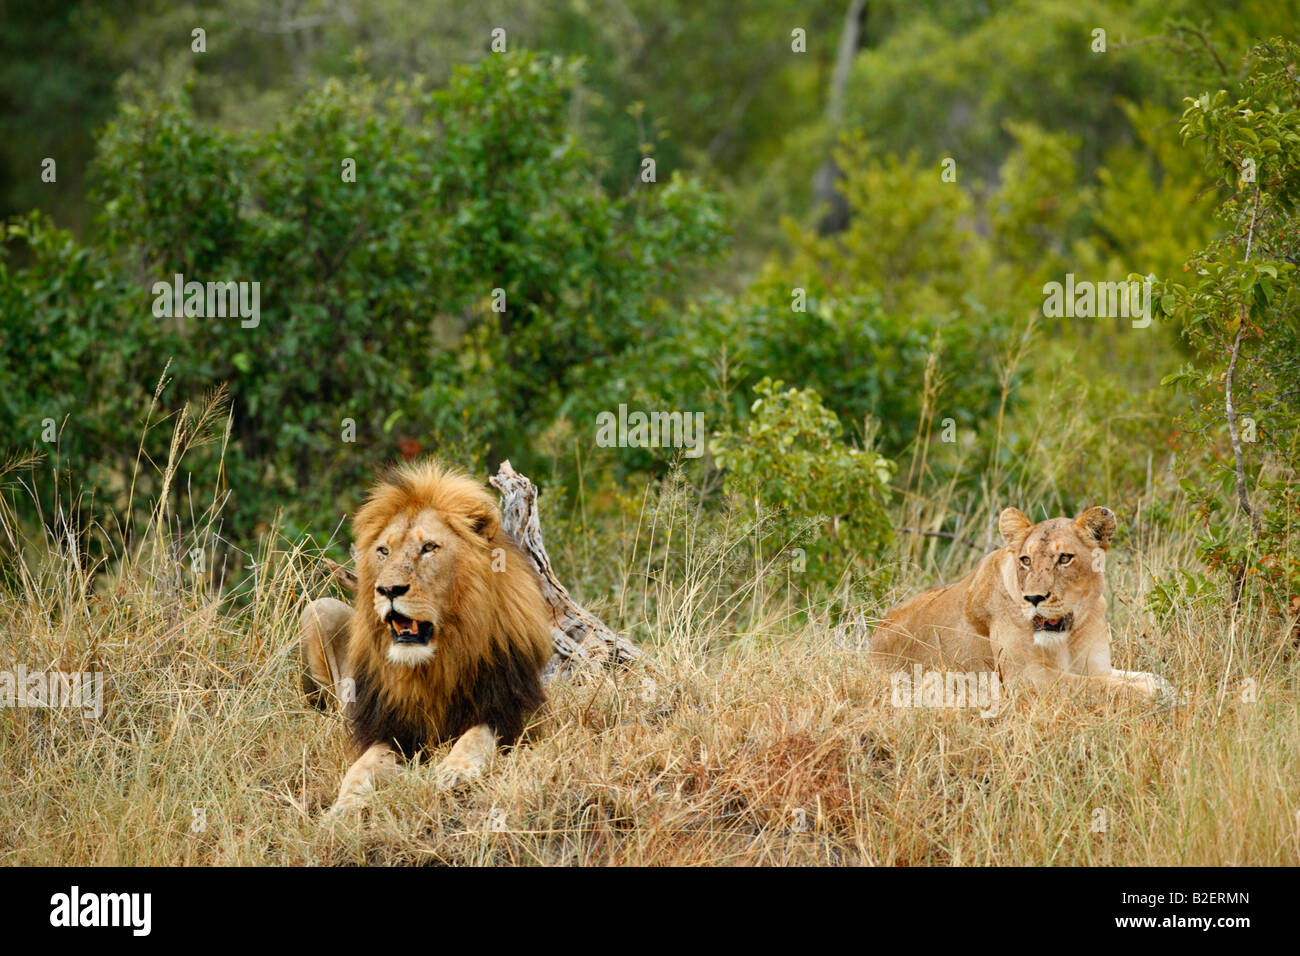 Scenic view of a male lion with black mane and a lioness resting on a grassy mound Stock Photo